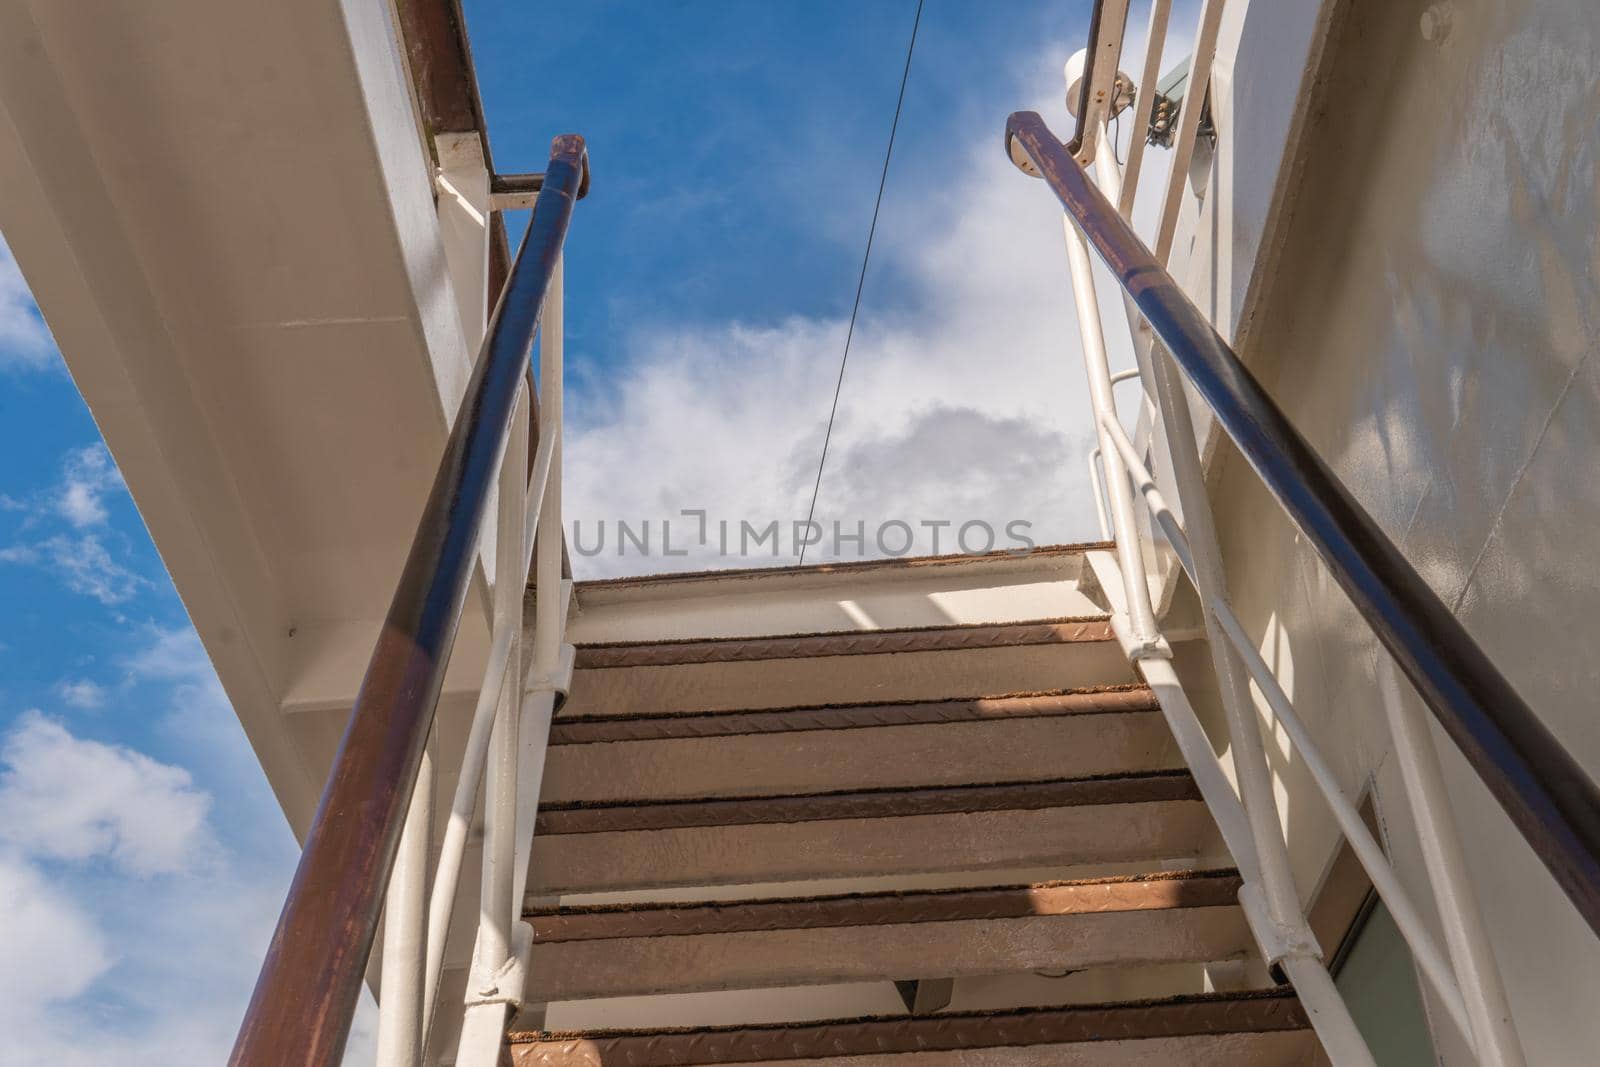 stairs on deck sailing summer yacht, cruise beautiful eck ransport, lifestyle Sailboat shipboard cabin, 4k tourists seascape cruise liner lifeboat lower deck drone view of the sky